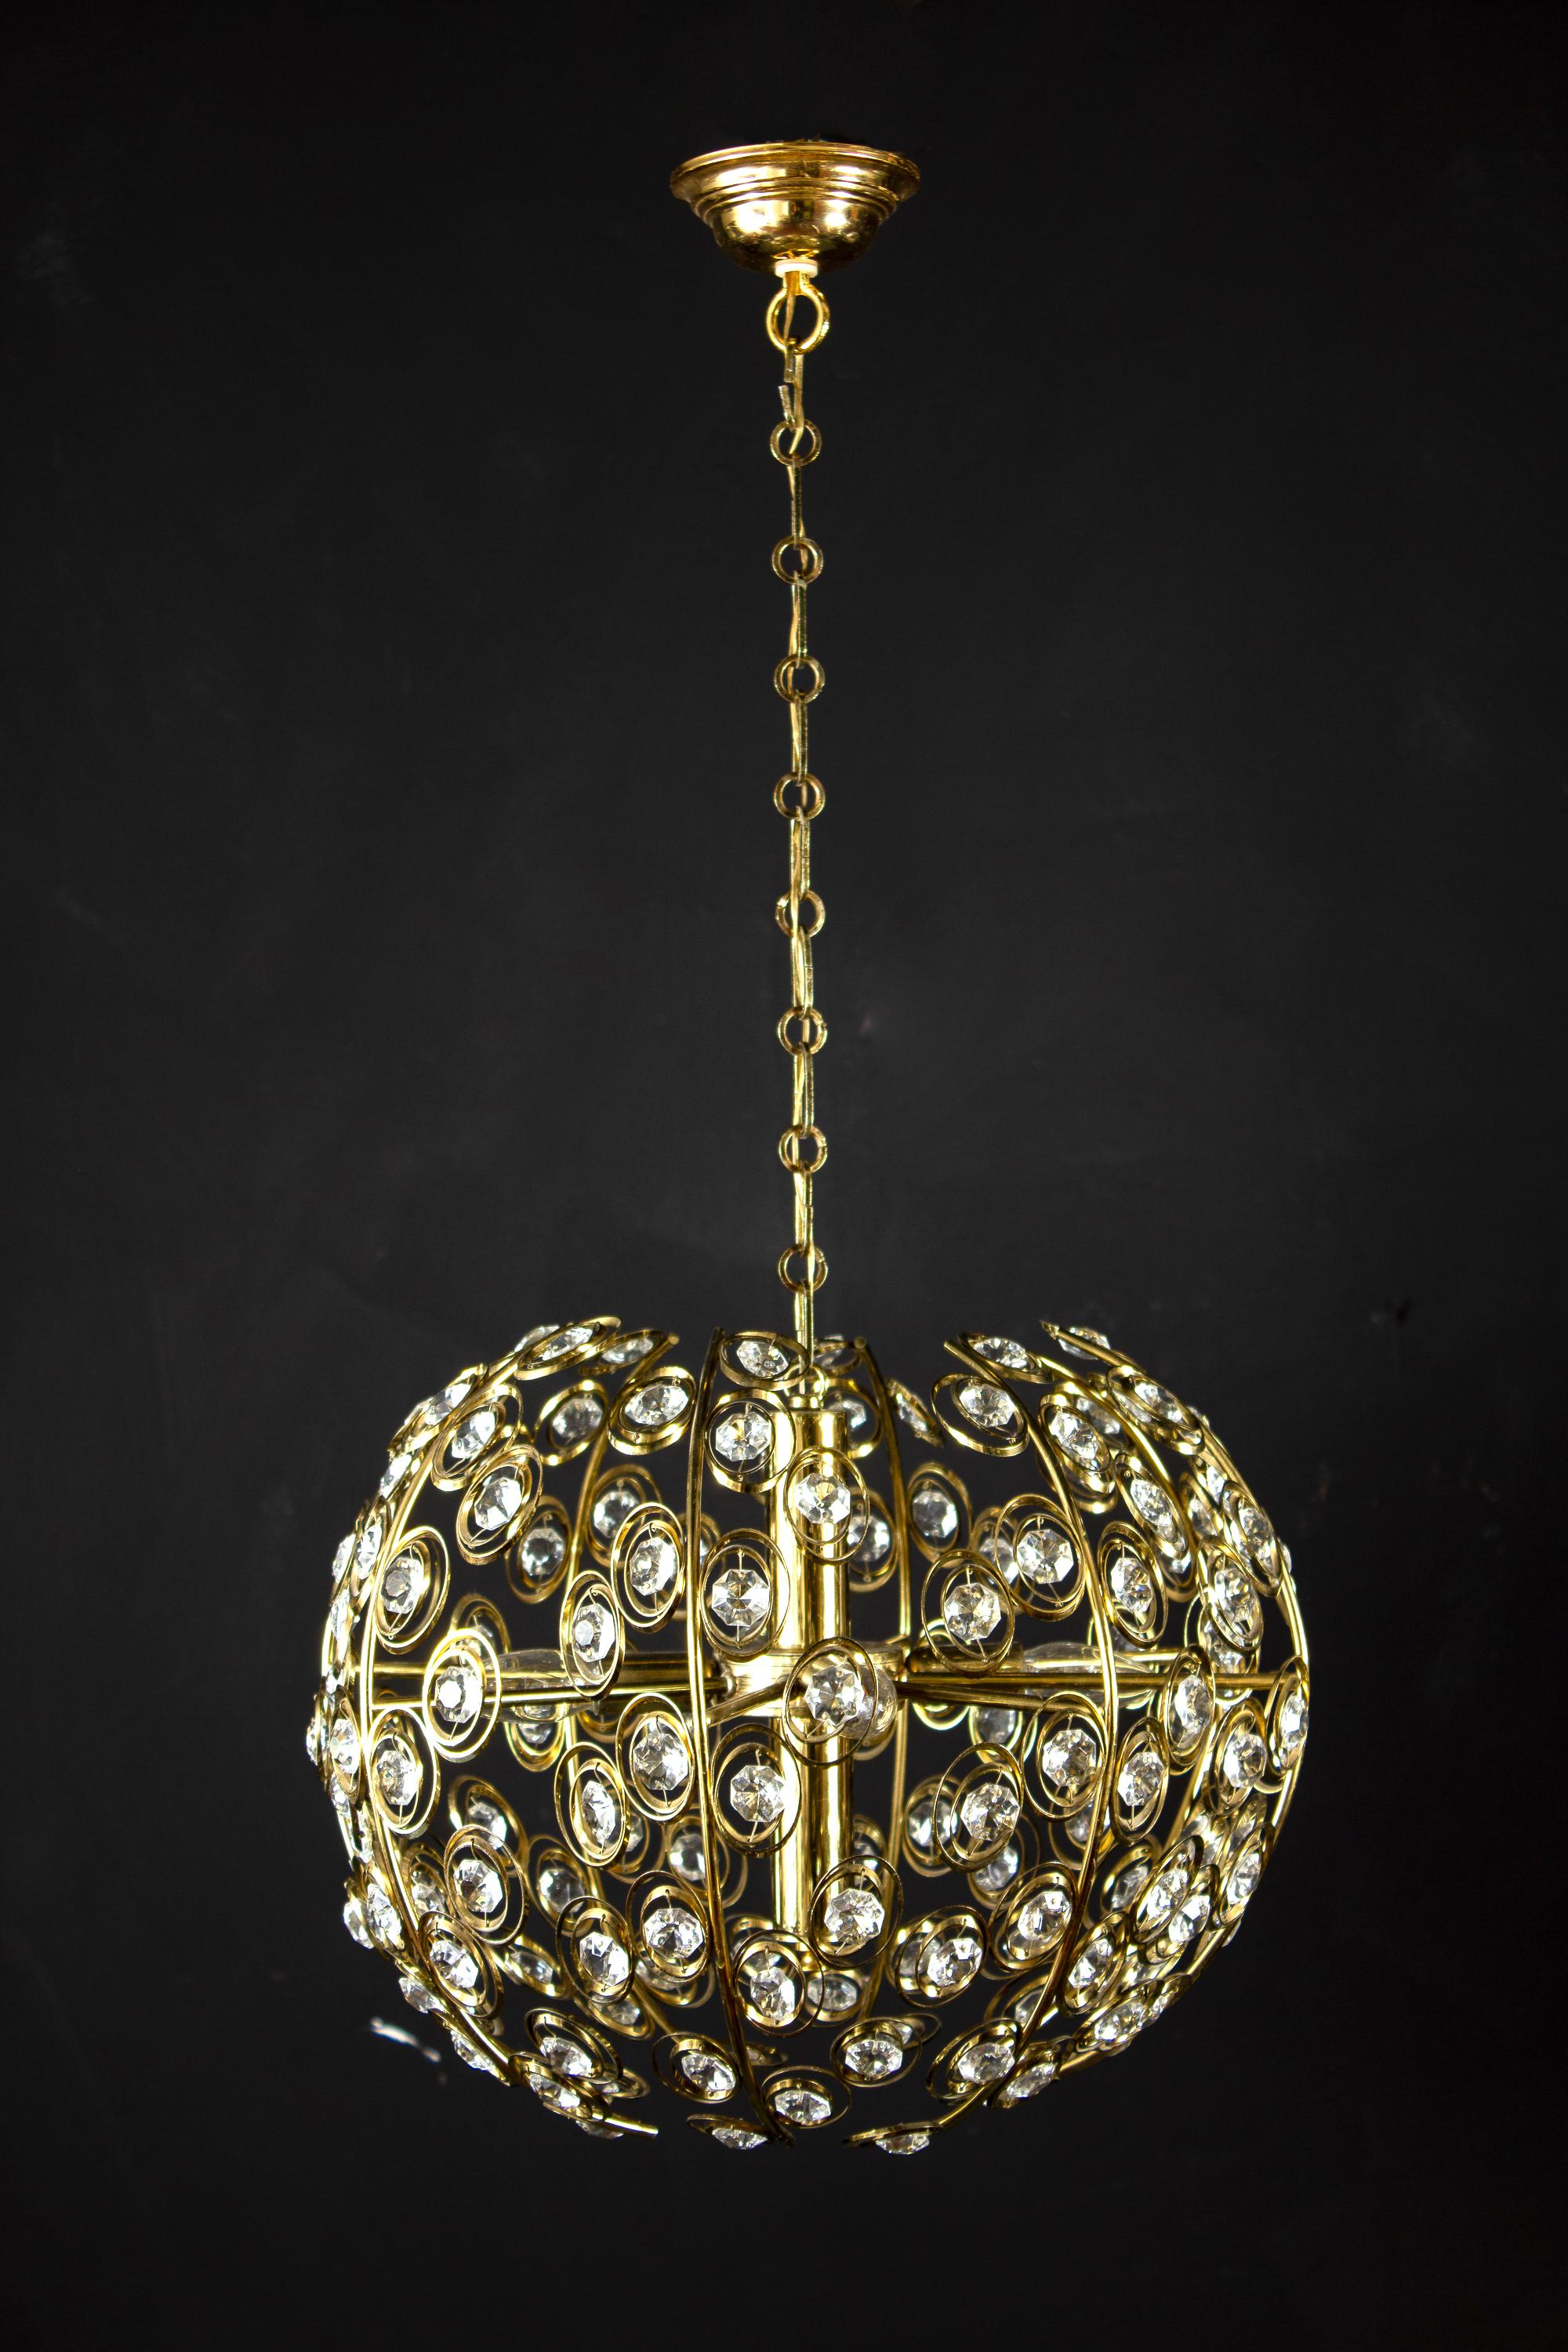 Golden Globe and Diamond Crystal Midcentury Chandelier by Gaetano Sciolari, 1960 In Excellent Condition For Sale In Rome, IT